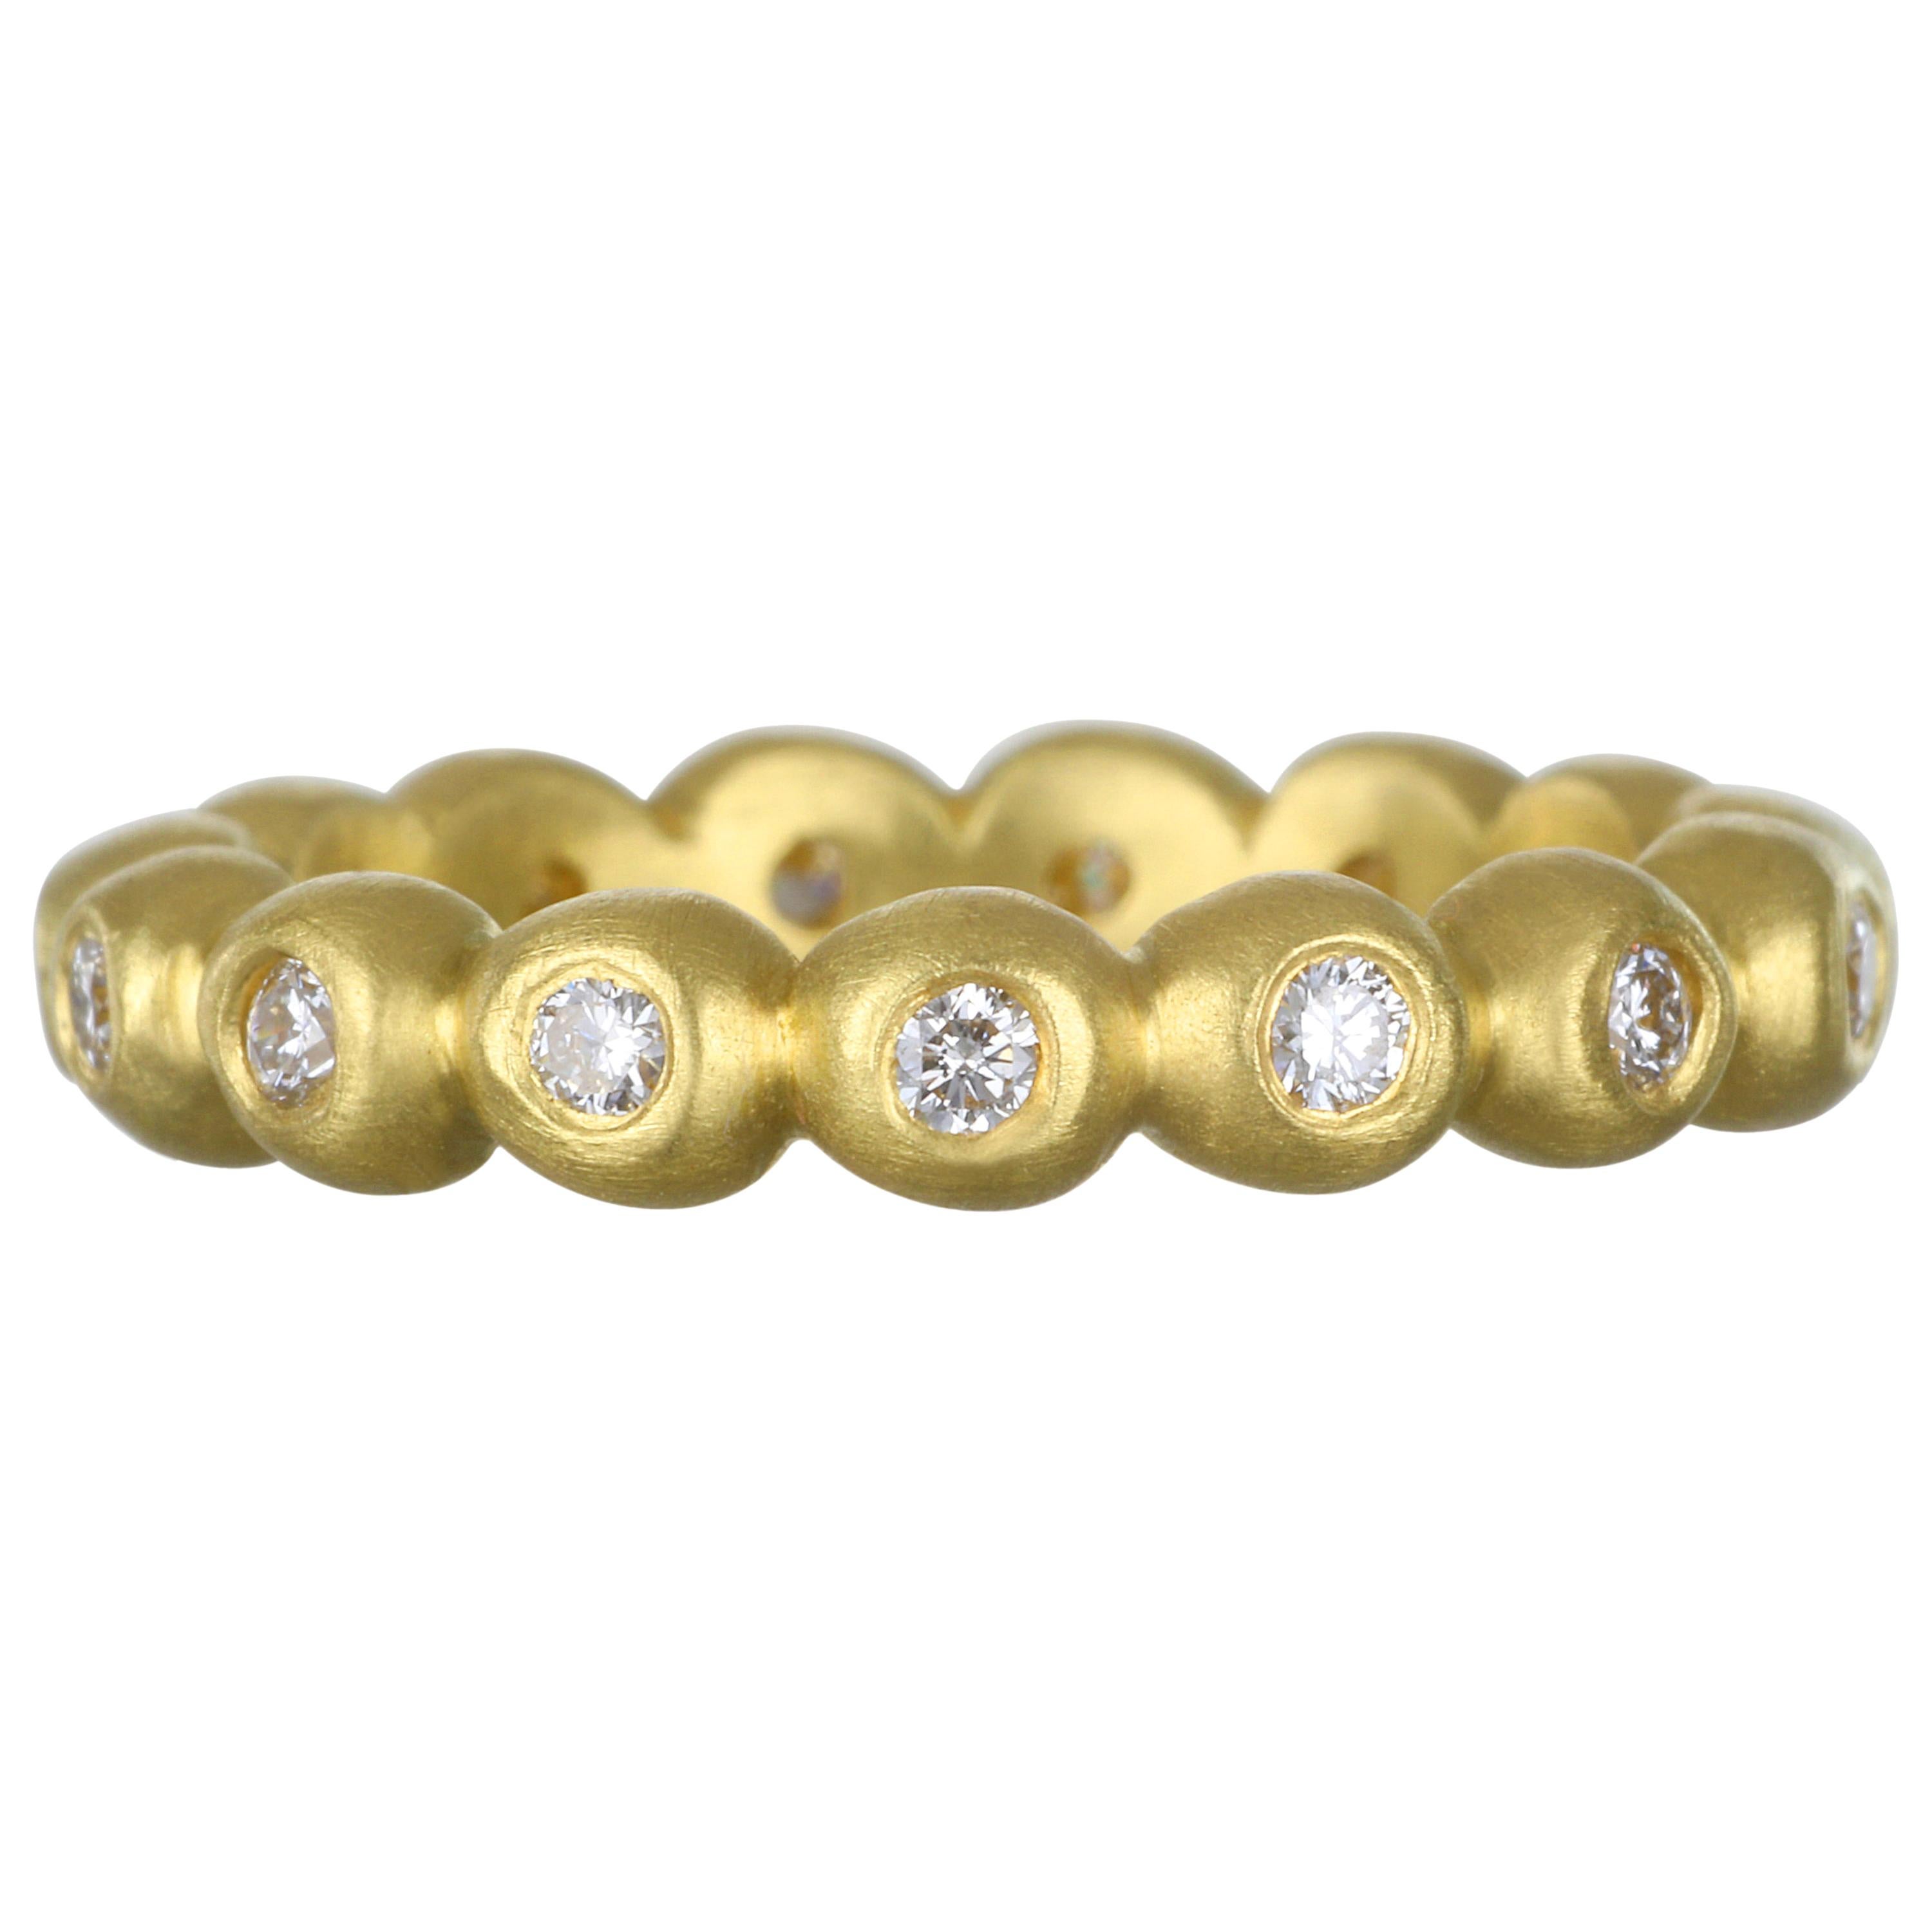 Handcrafted in 18 karat gold, Faye Kim's Medium Granulation Bead Ring is part of her signature collection. Ideal for stacking or wearing alone for a simple, sophisticated look. 

Size 7
Width: 3.5mm
Signature Collection:  non negotiable

Photos show